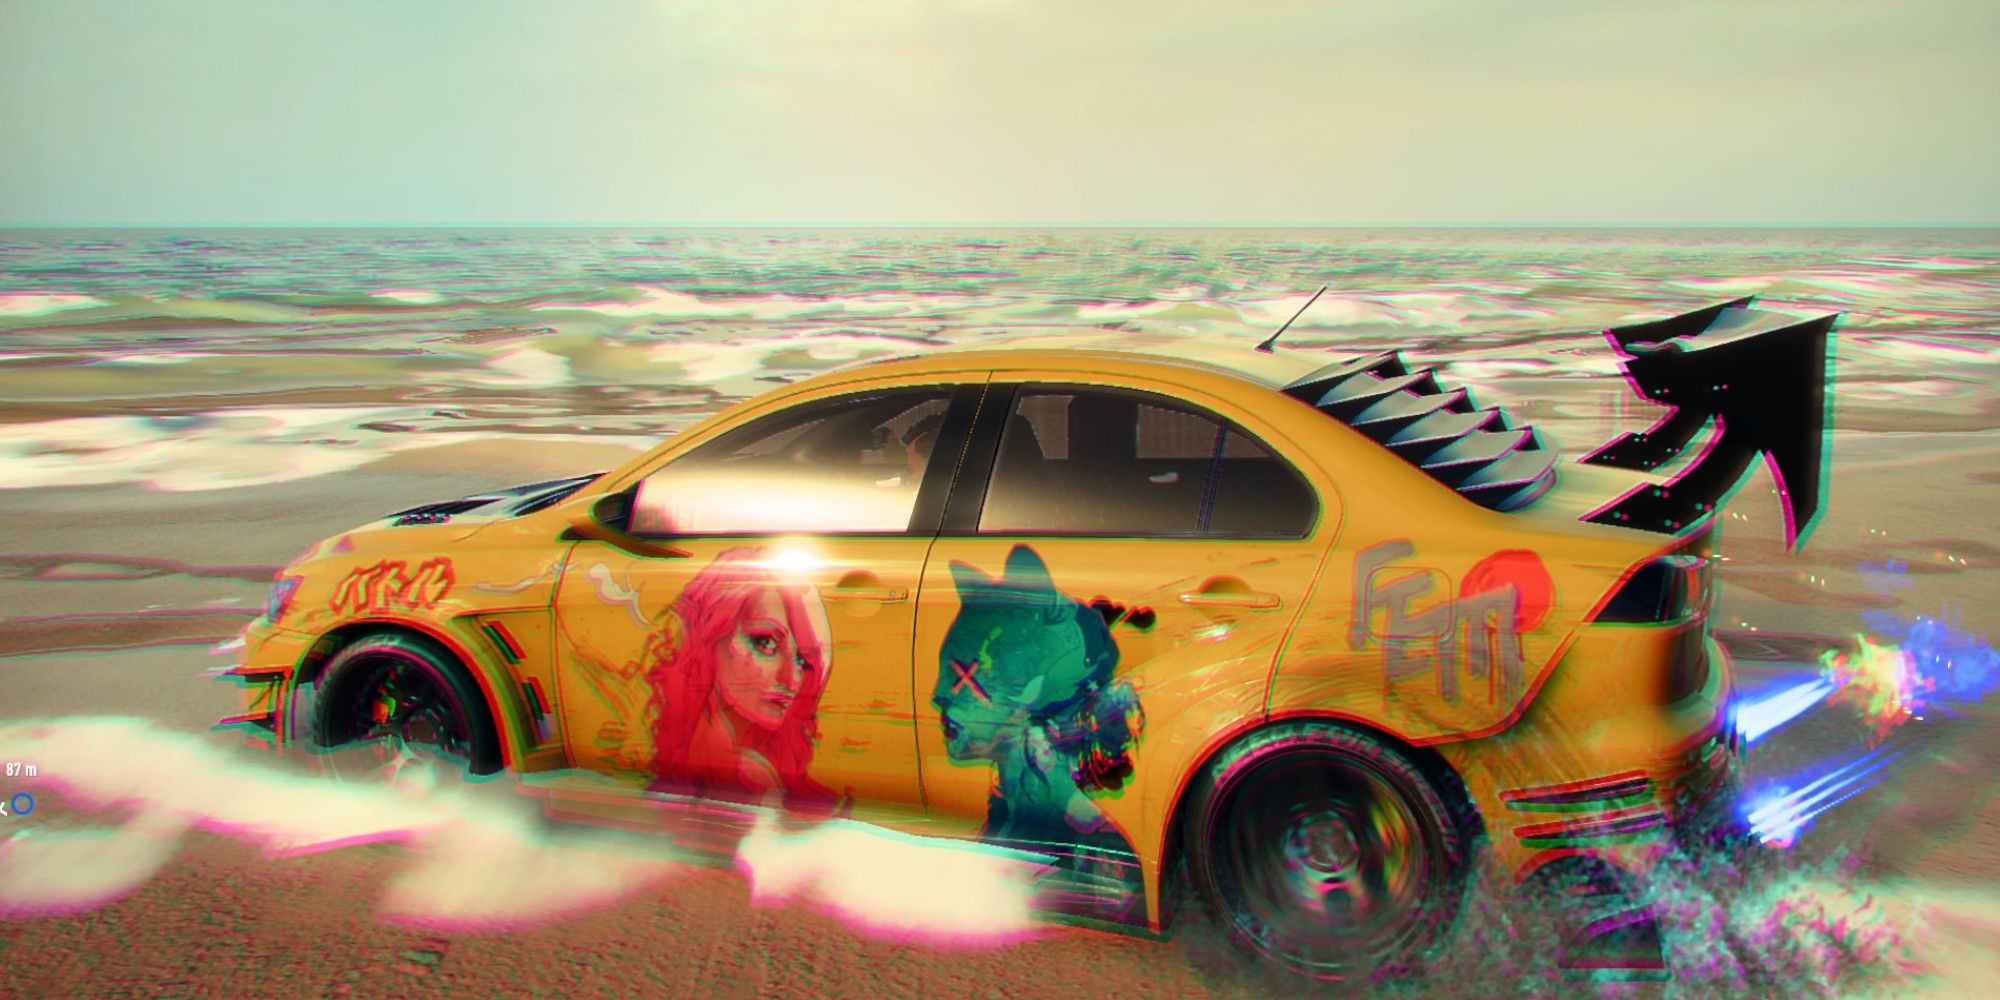 yelow mitsubishi in the surf with women decals and purple nitrous firing out need for speed heat